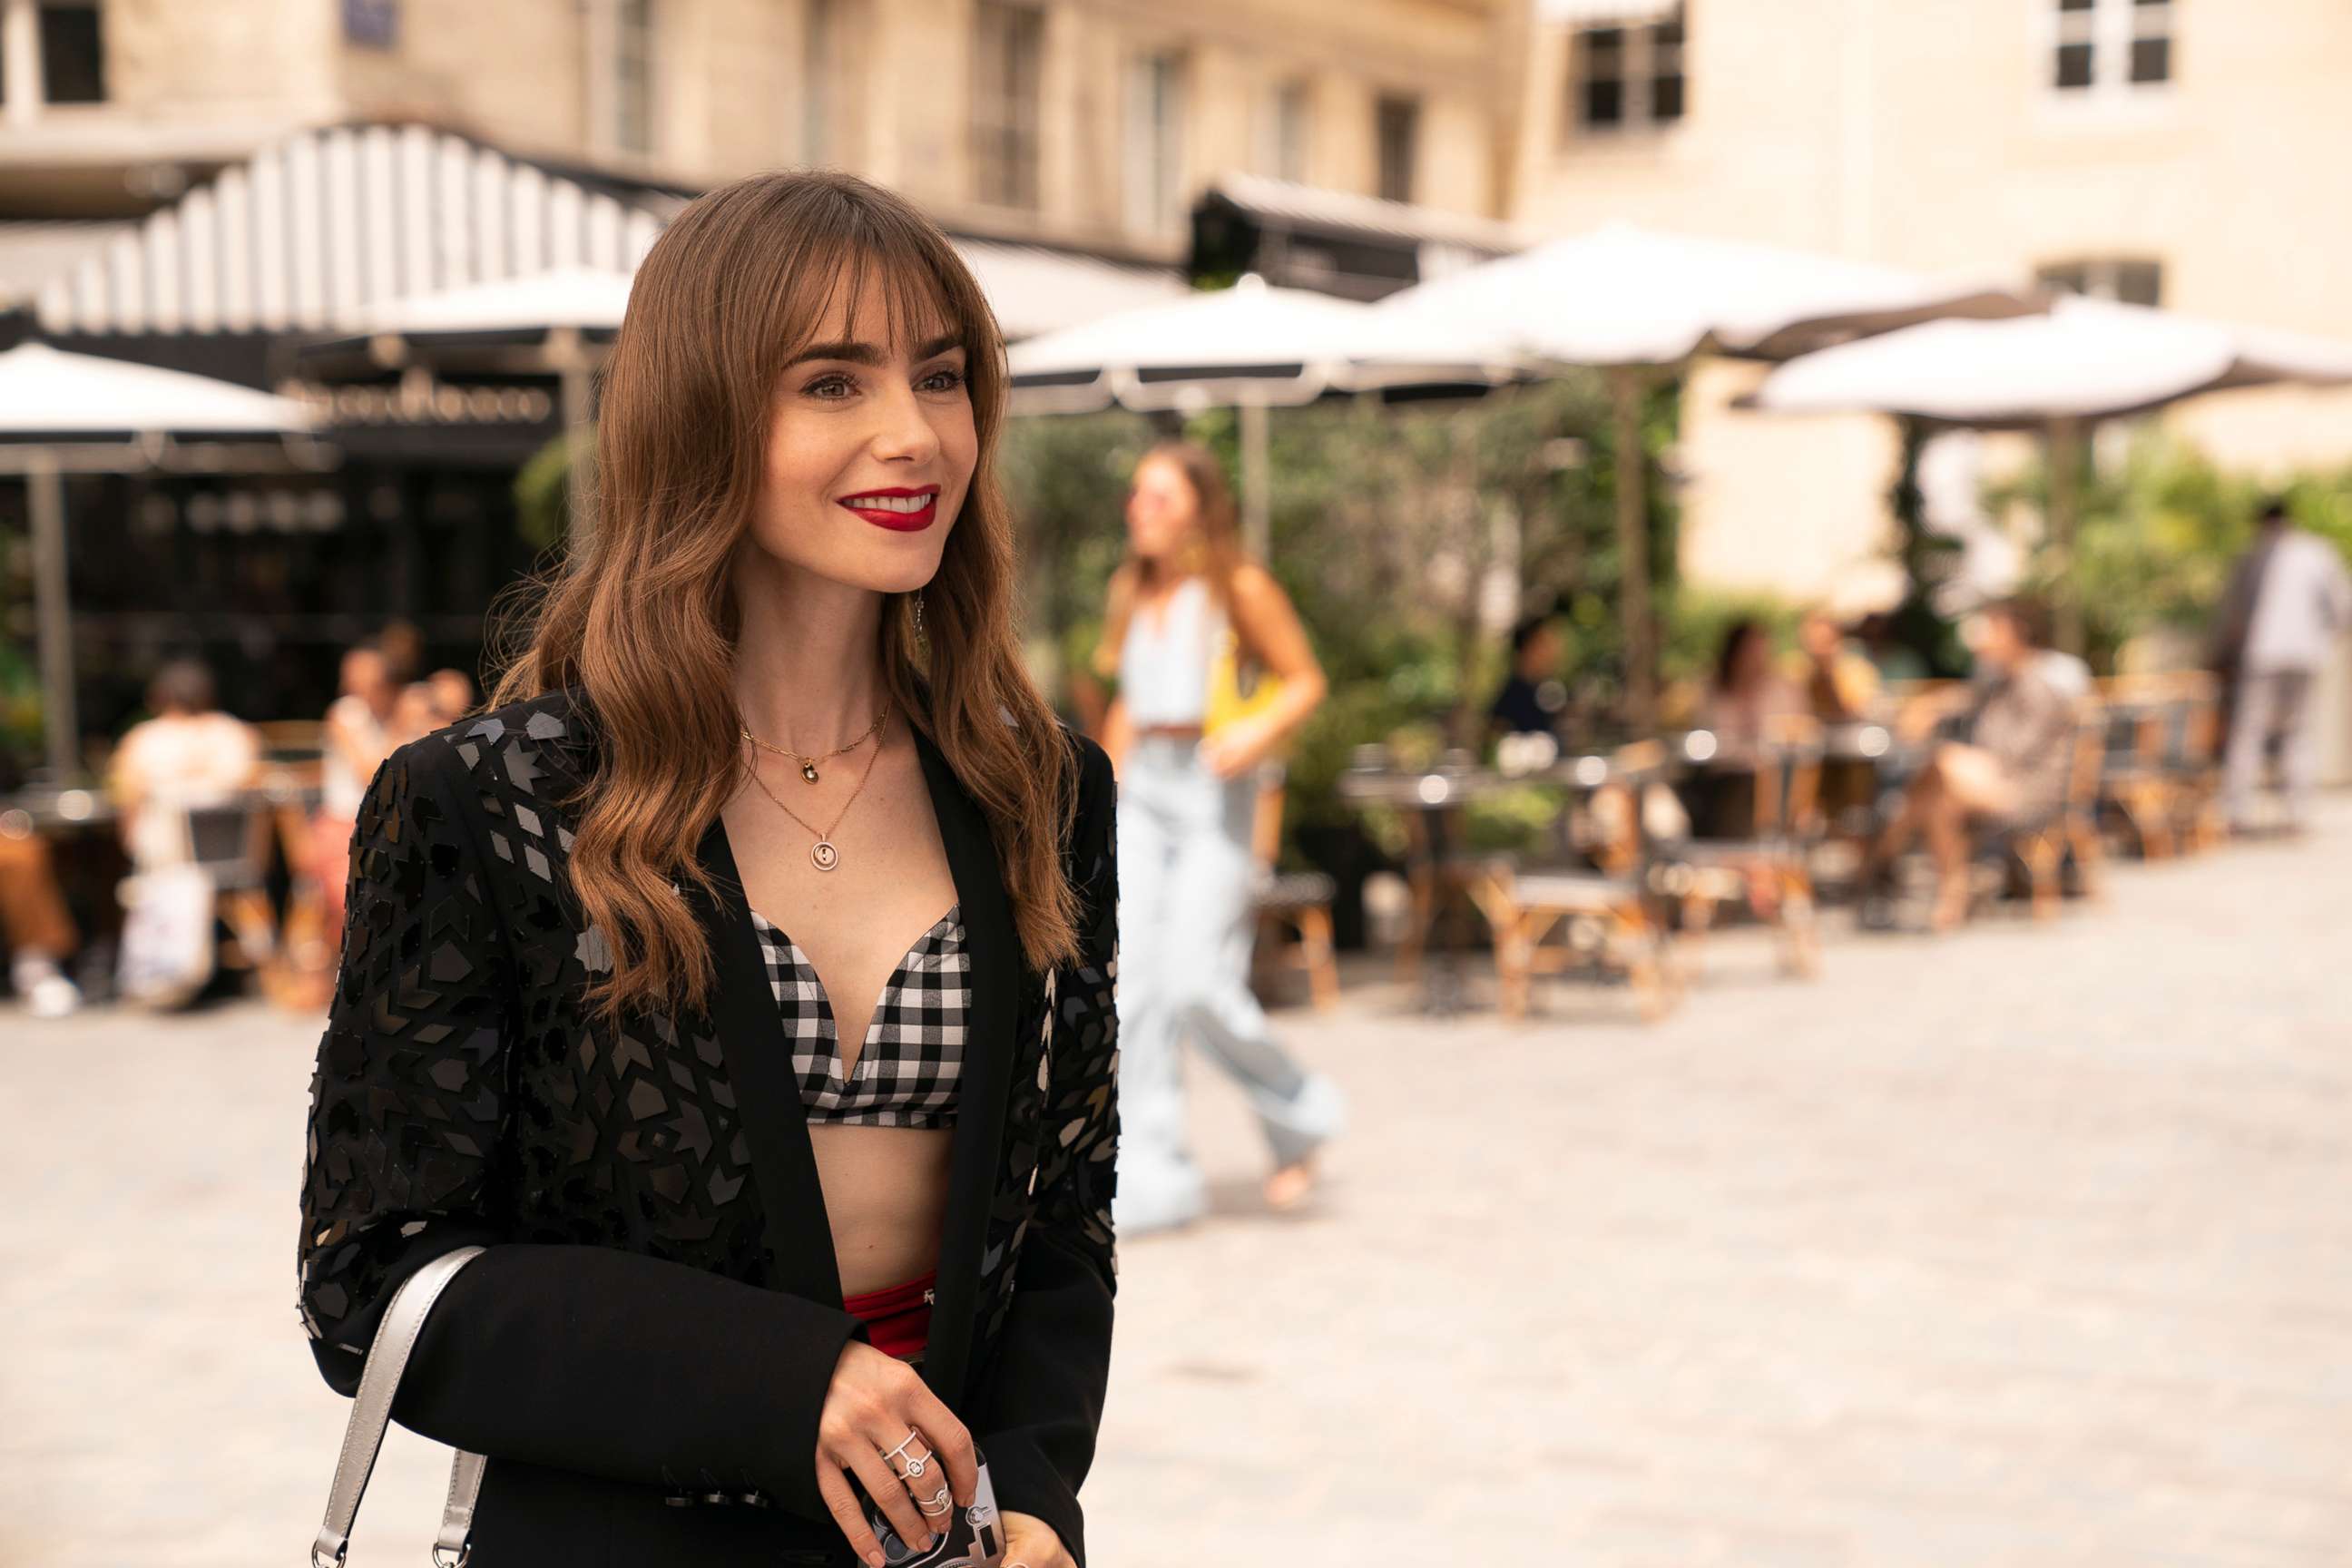 A look at some of Lily Collins' dramatic outfits from 'Emily in Paris